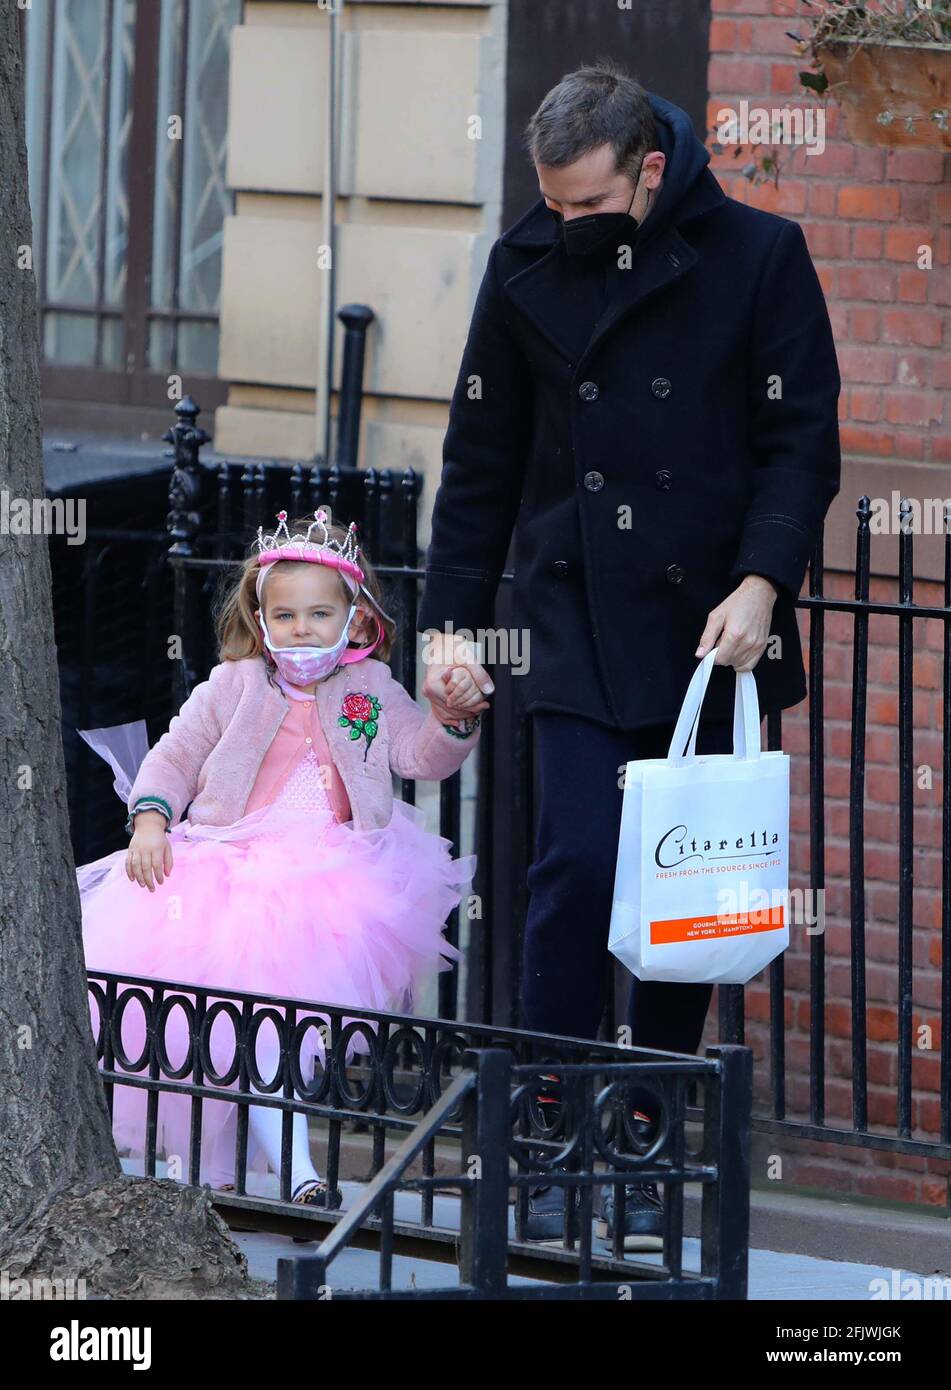 Optimal så meget reform New York - NY - 20210319- Irina Shayk and Bradley Cooper Take Daughter Lea  to Schooldressed up as a princess for her Birthday -PICTURED: Bradley  Cooper With Daughter Lea Jose Perez Stock Photo - Alamy